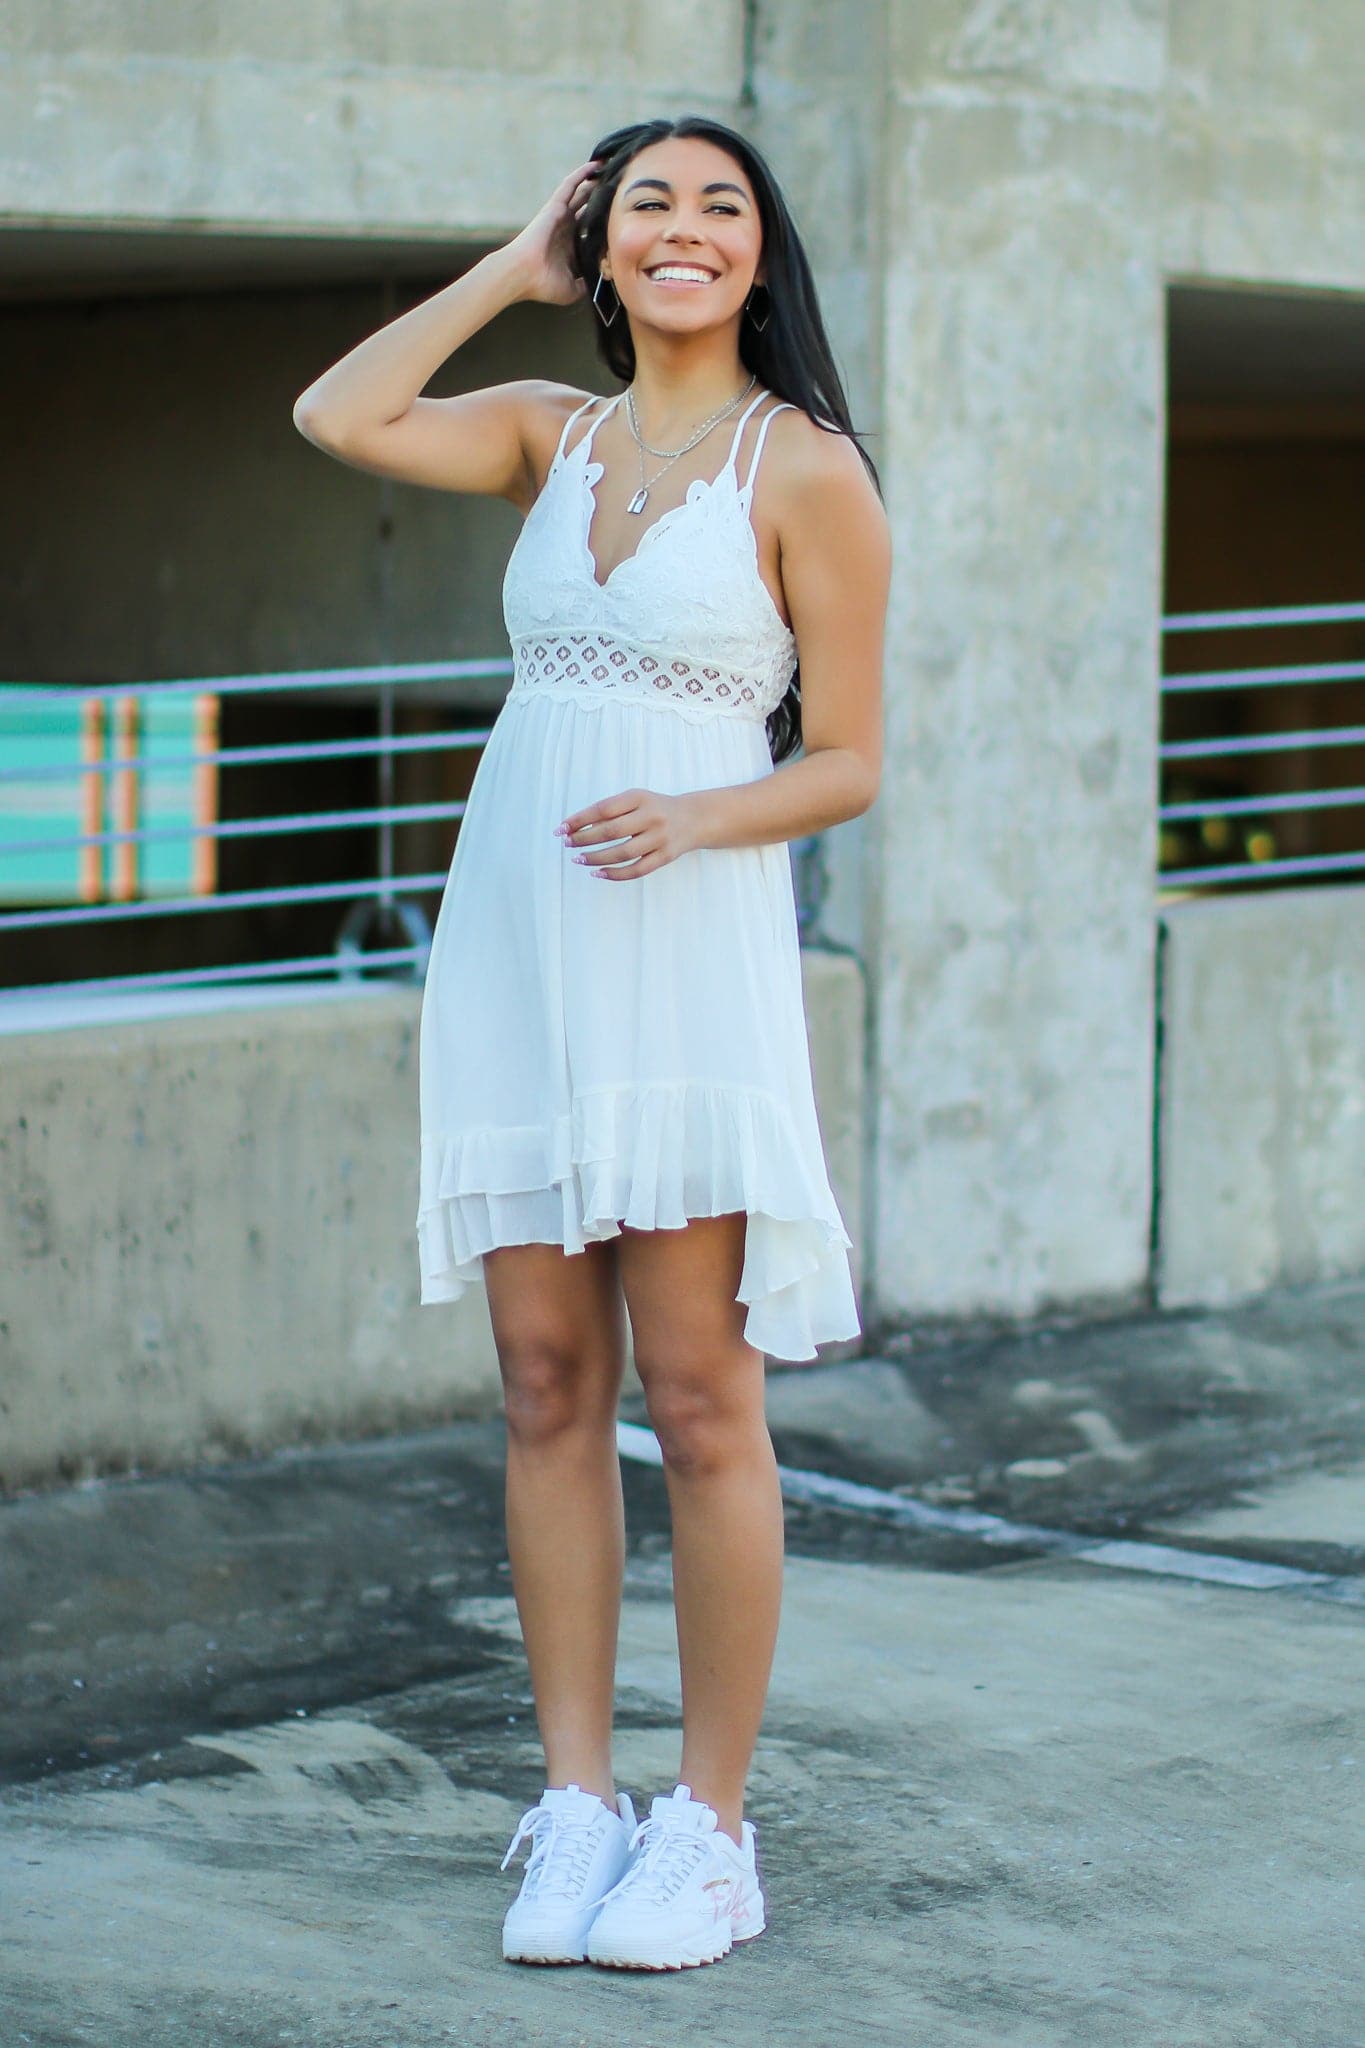  Just Sway Crochet Floral Lace Dress - FINAL SALE - Madison and Mallory